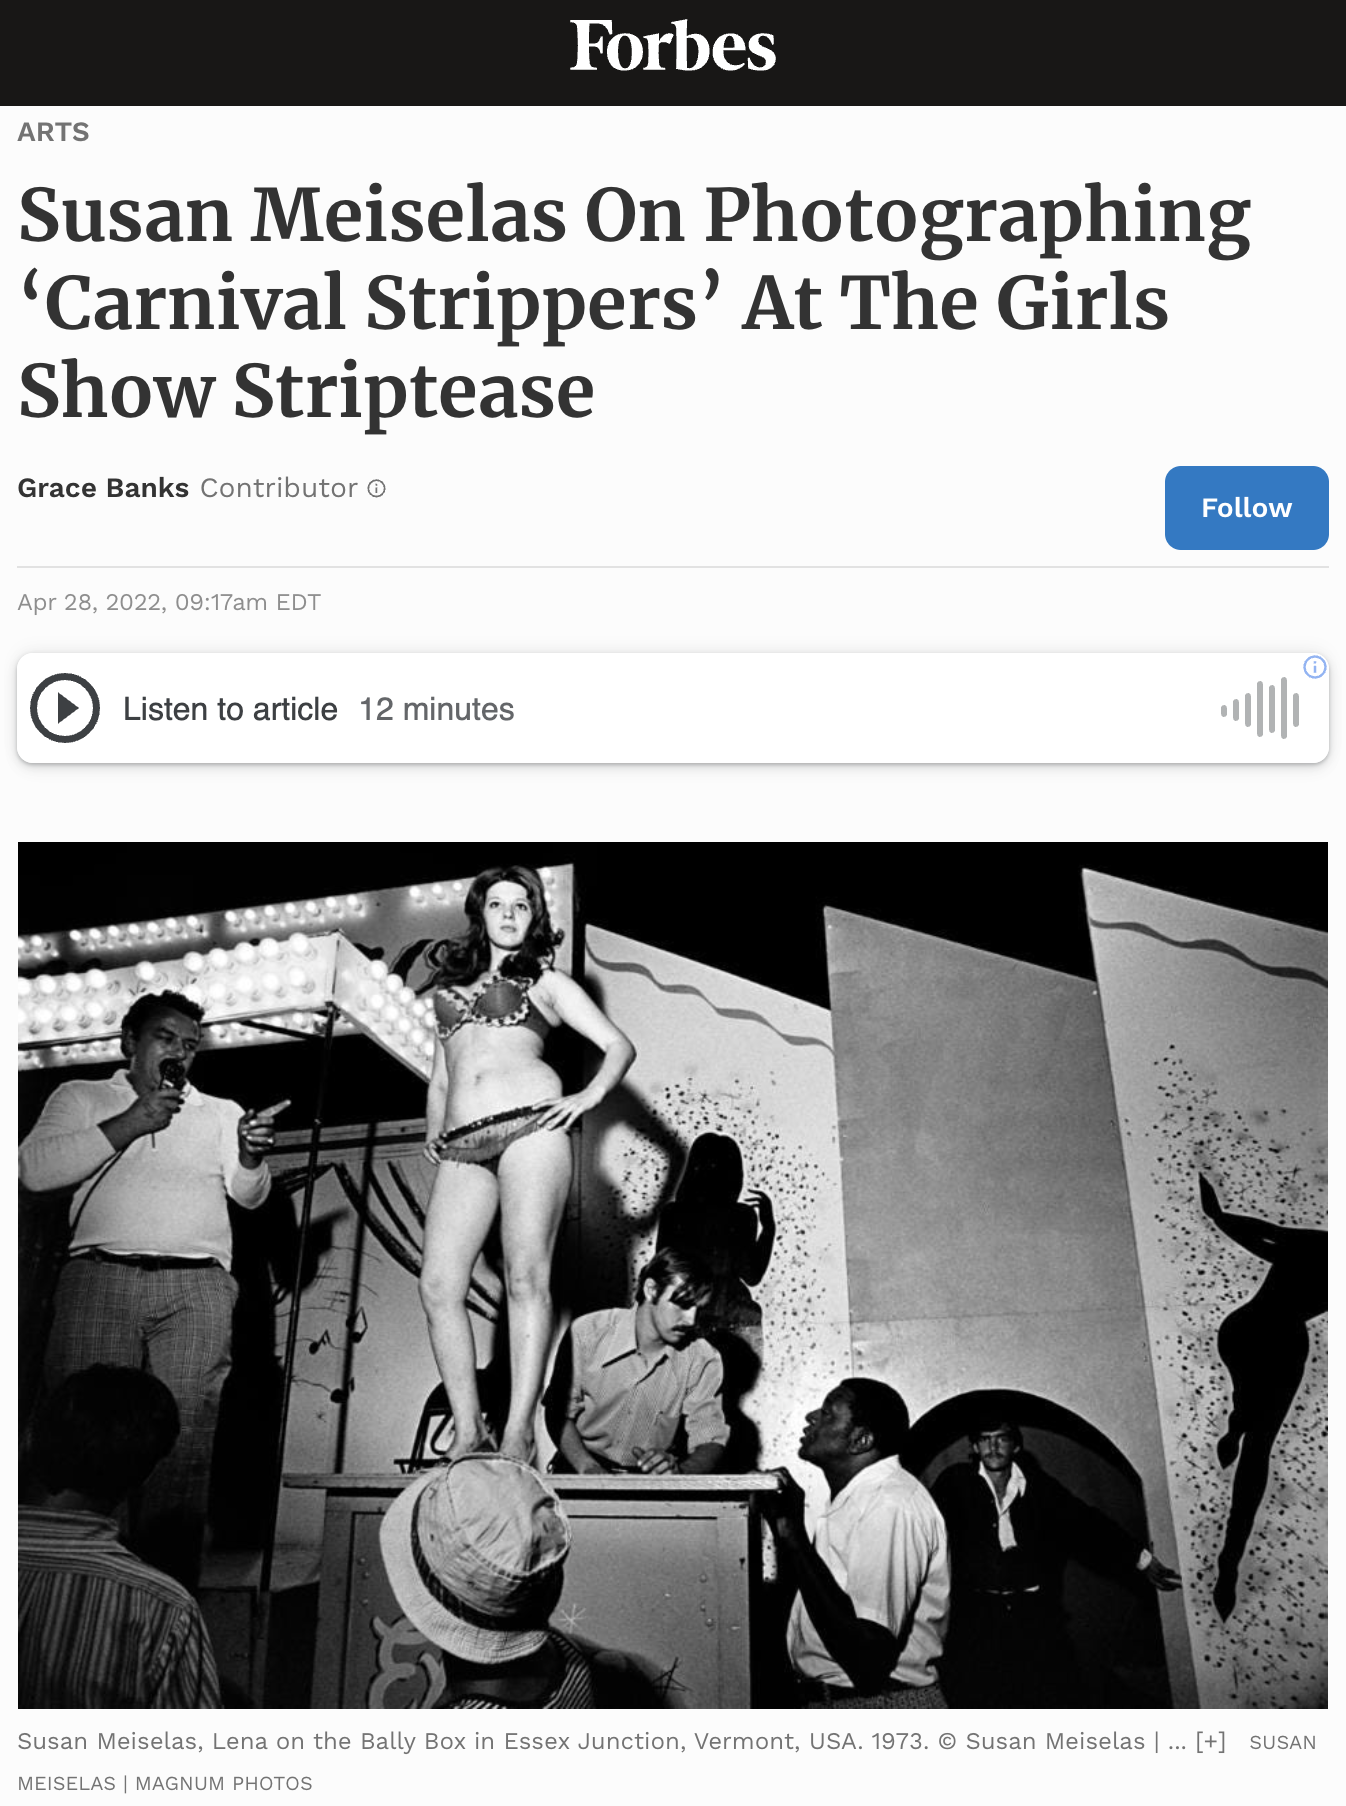 Thumbnail of Forbes: Susan Meiselas On Photographing ‘Carnival Strippers’ At The Girls Show Striptease